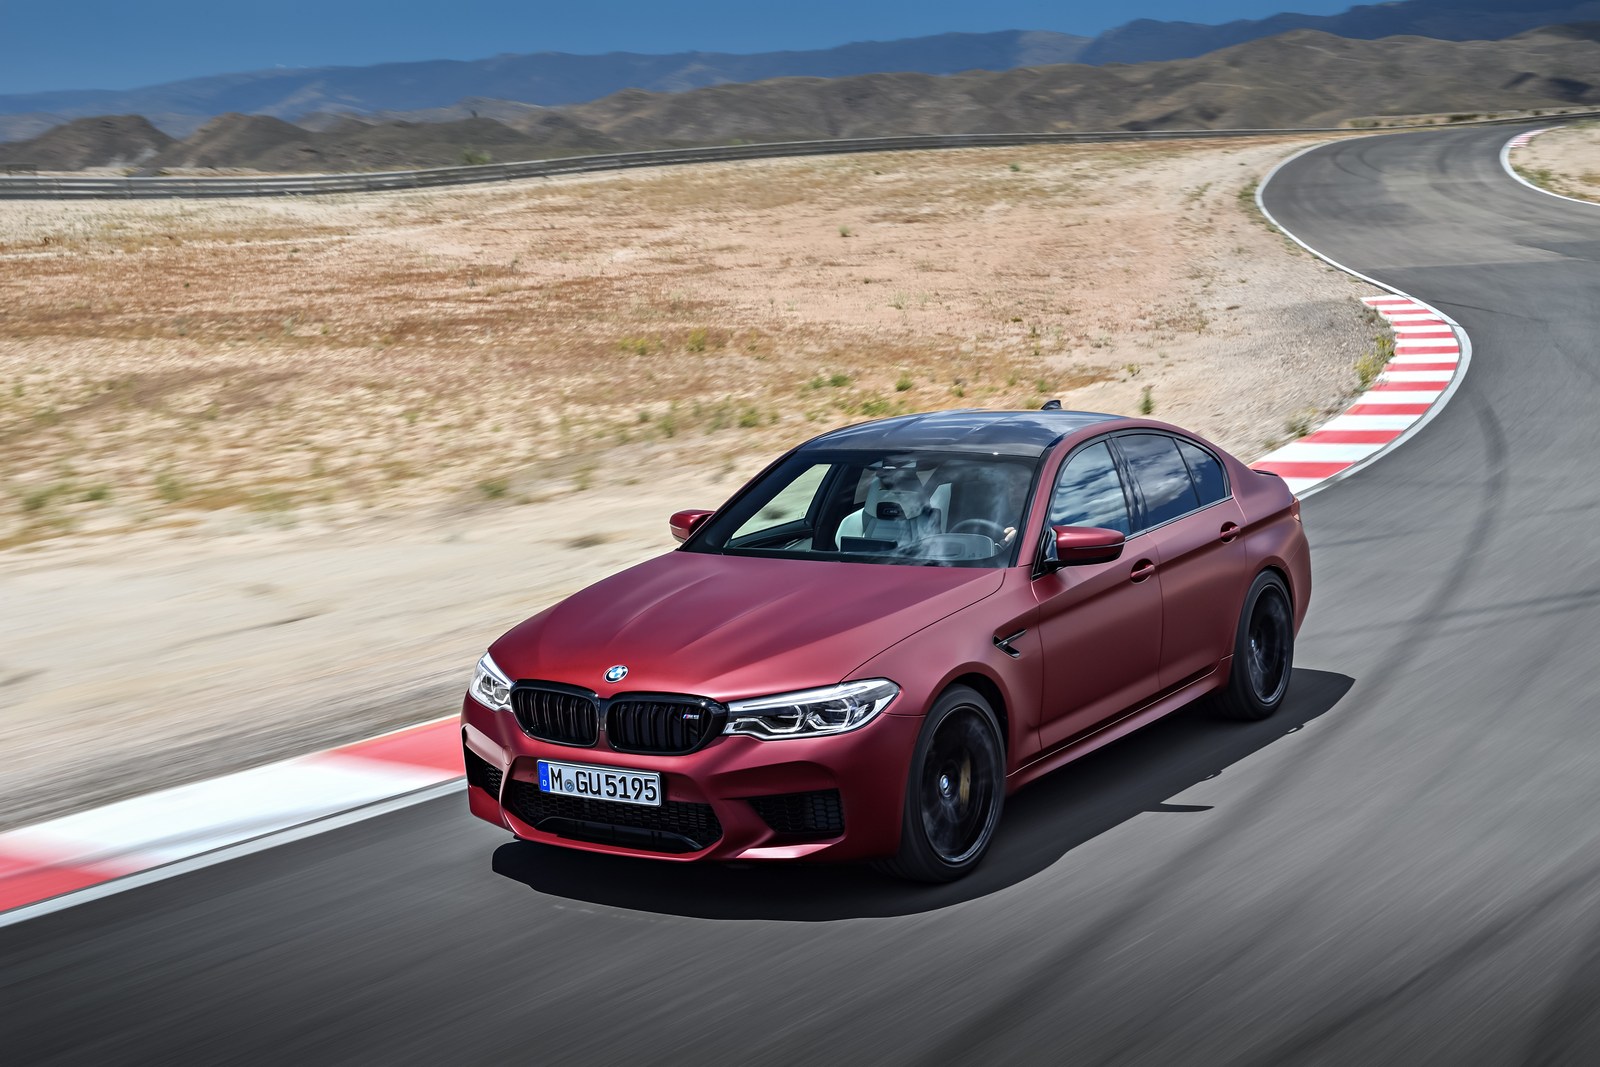 2018 F90 BMW M5 Announced in the UK, Prices Start at £78,935